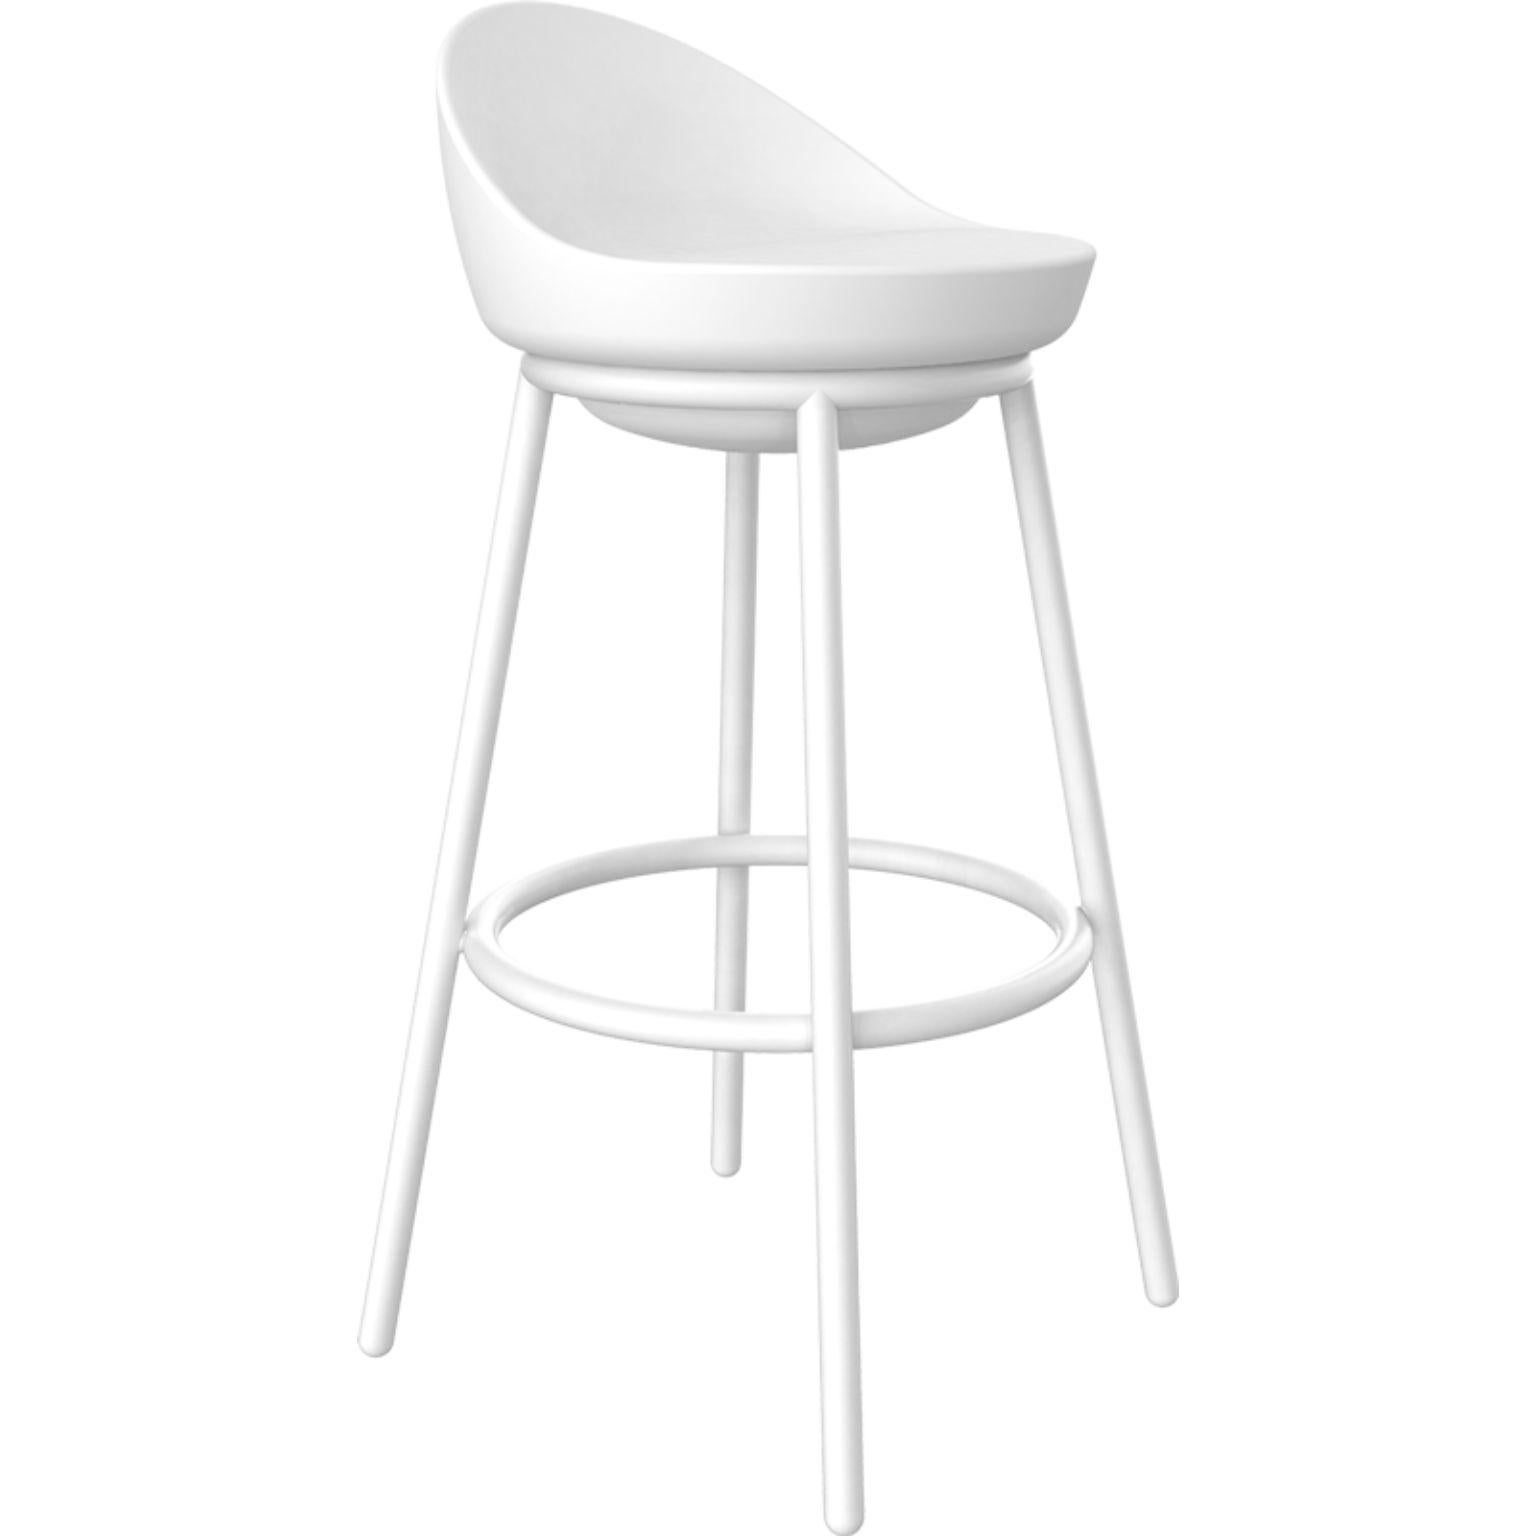 Lace white stool by Mowee.
Dimensions: D43 x H91 cm.
Material: Polyethylene, Sstainless steel.
Weight: 6.7 kg.
Also Available in different colours and finishes. 

Lace is a collection of furniture made by rotomoulding. Its shape resembles a